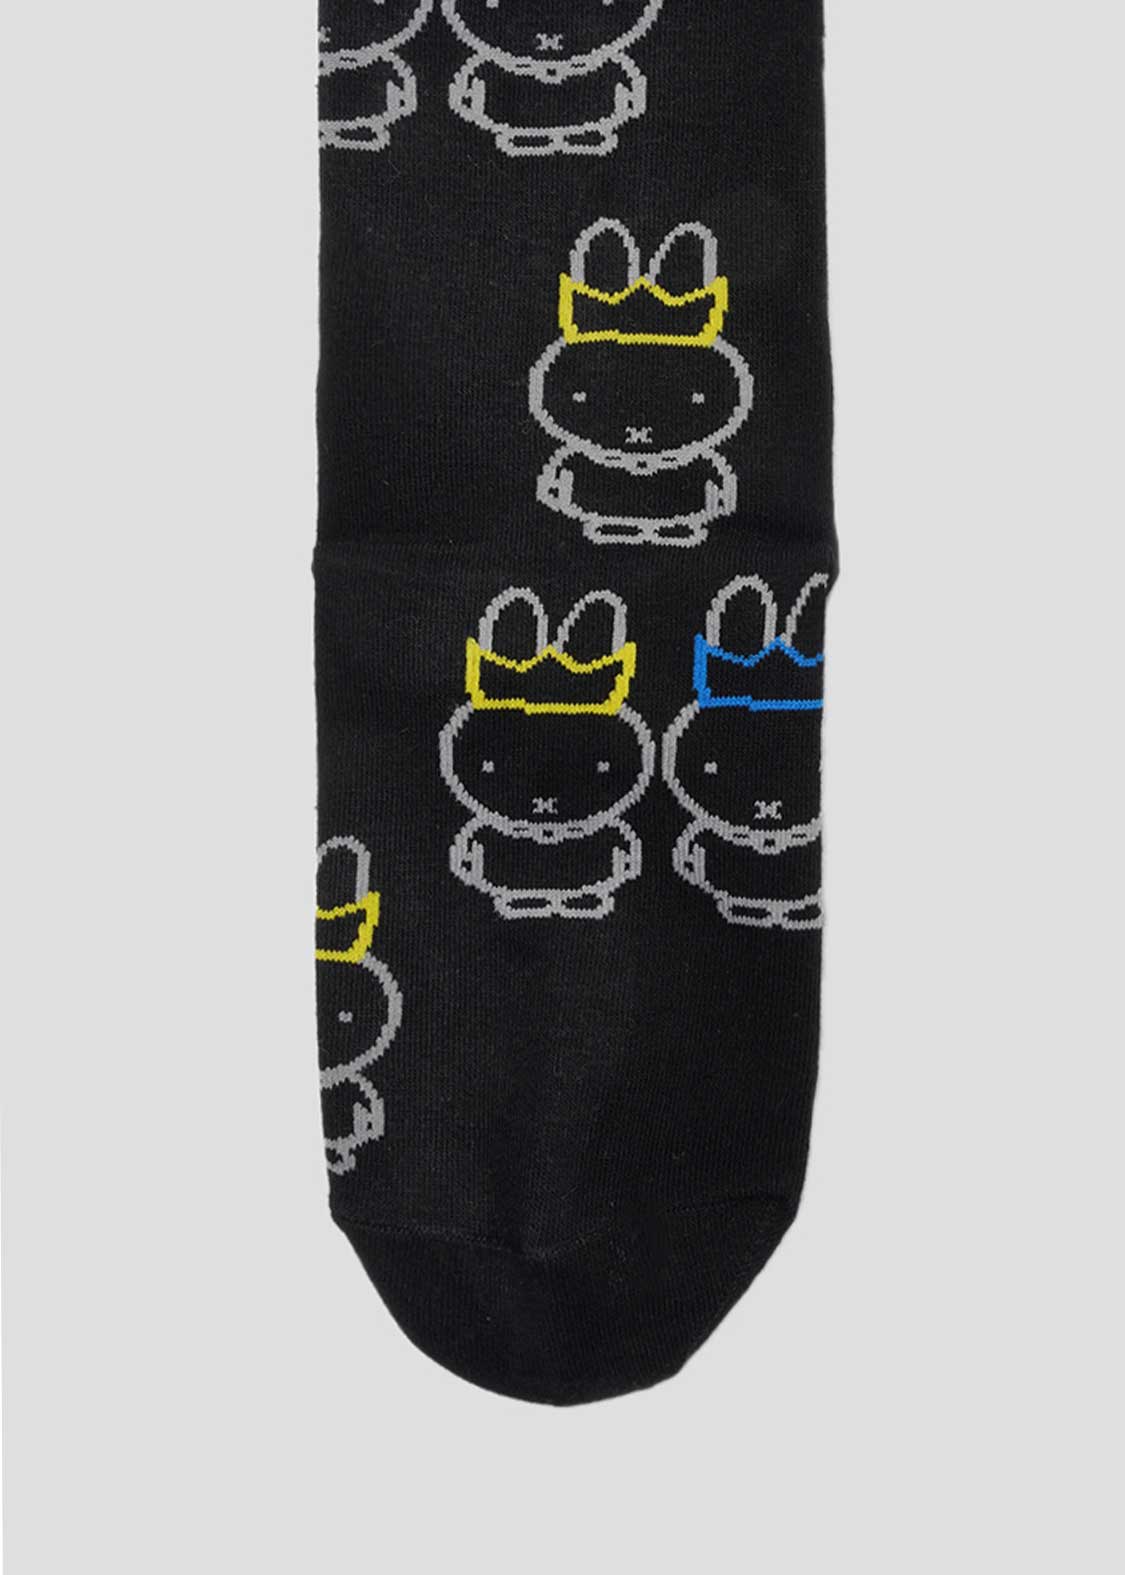 miffy Middle Socks (miffy_Crown Pattern)